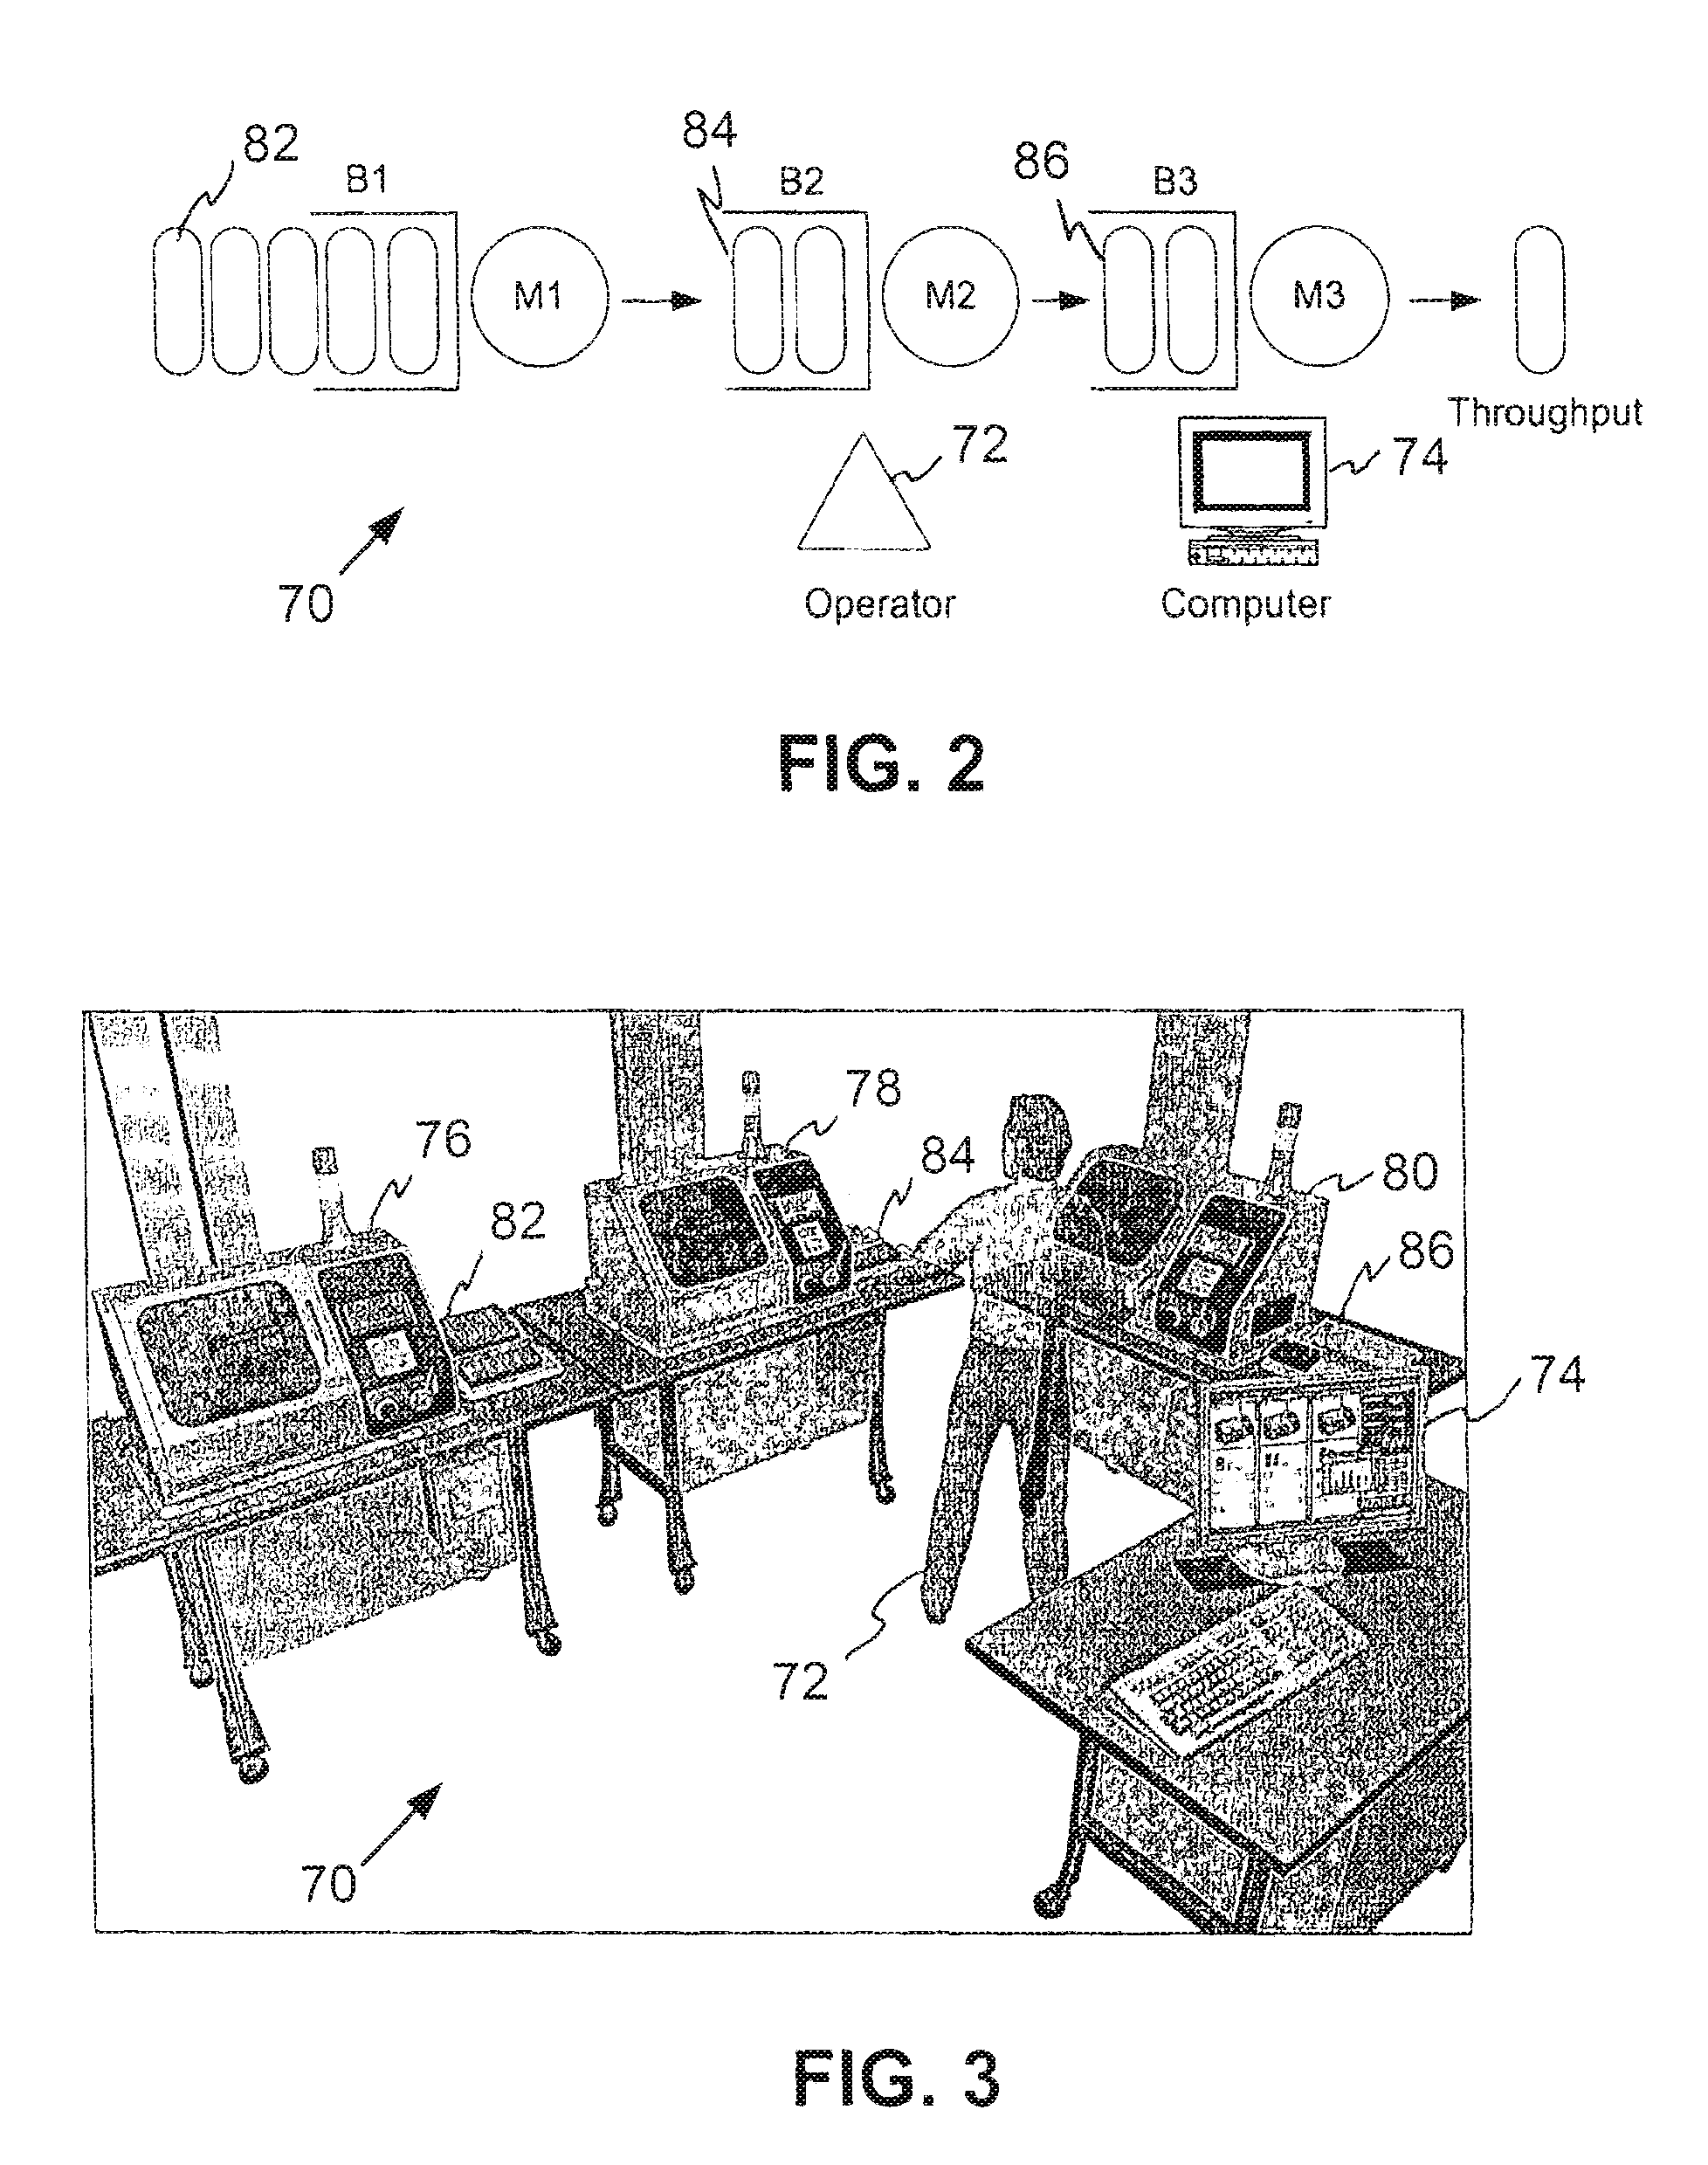 Systems and methods for a real time machine simulator to explore the effects of rules used in a modular manufacturing or assembly system